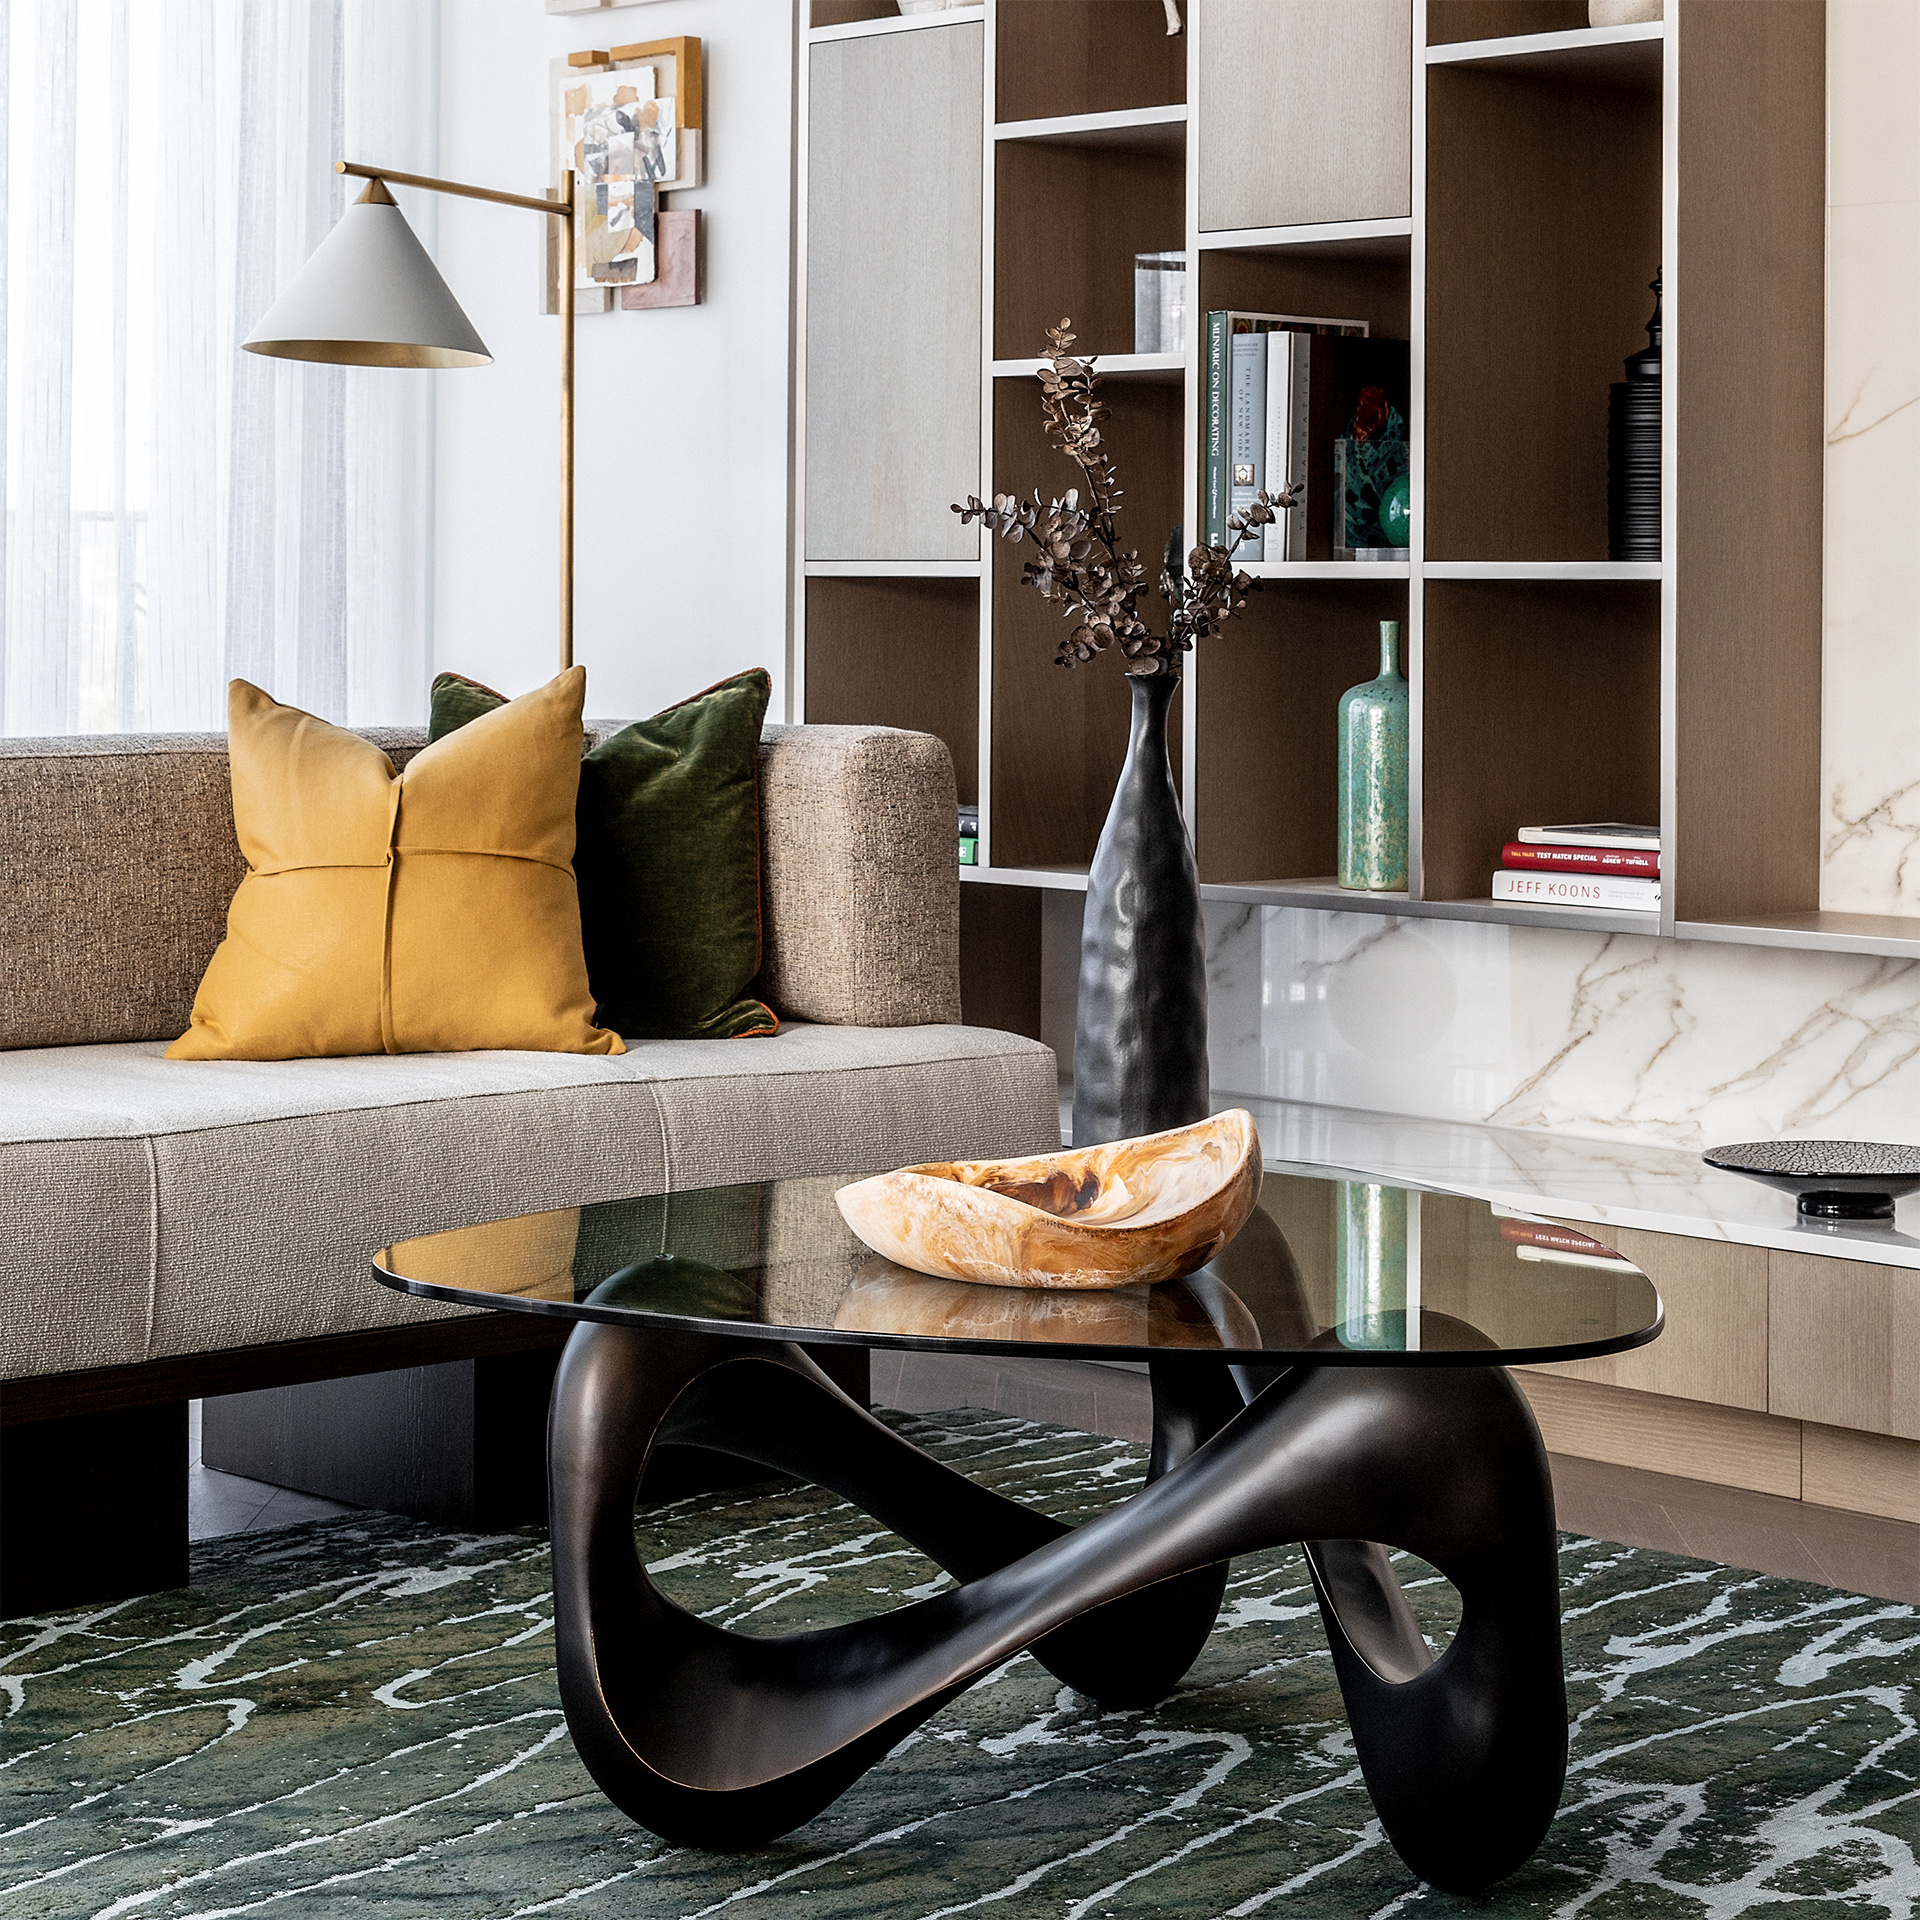 One St. John's Wood | Quirky dark coffee table centers the room | Angel O'Donnell